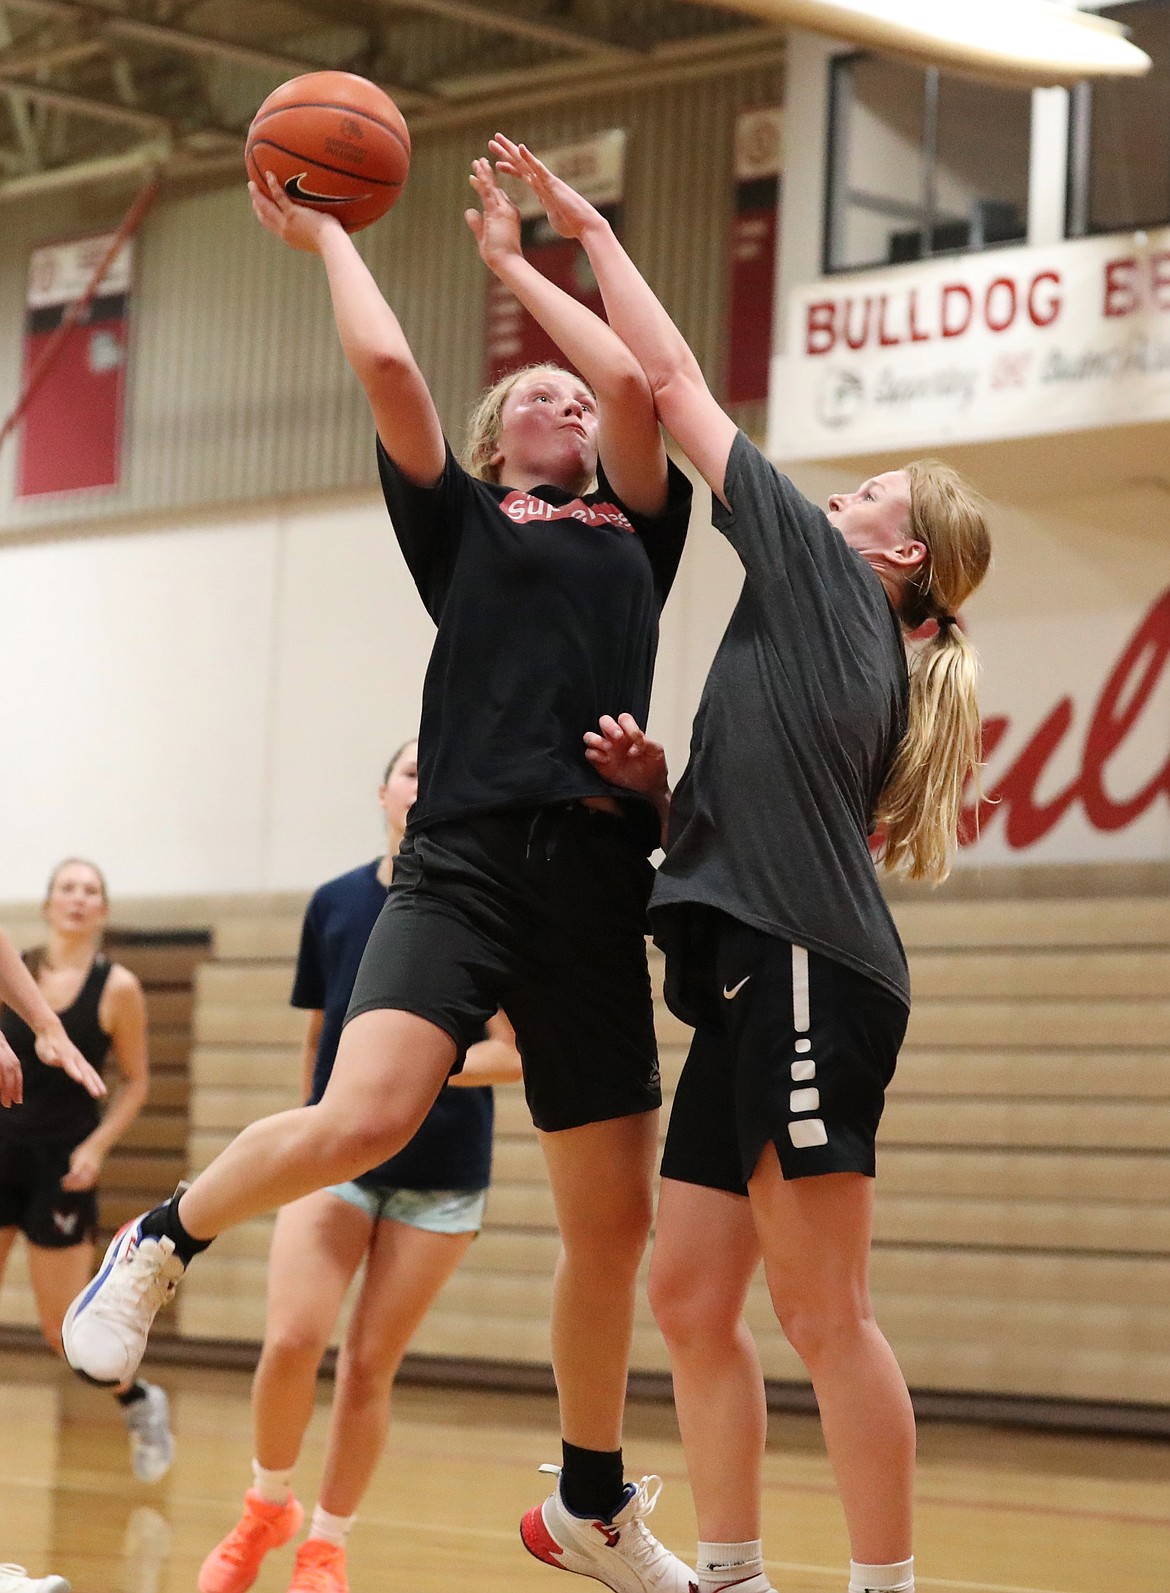 Karlie Banks tries to shoot over Sofia Platte during practice on Thursday.